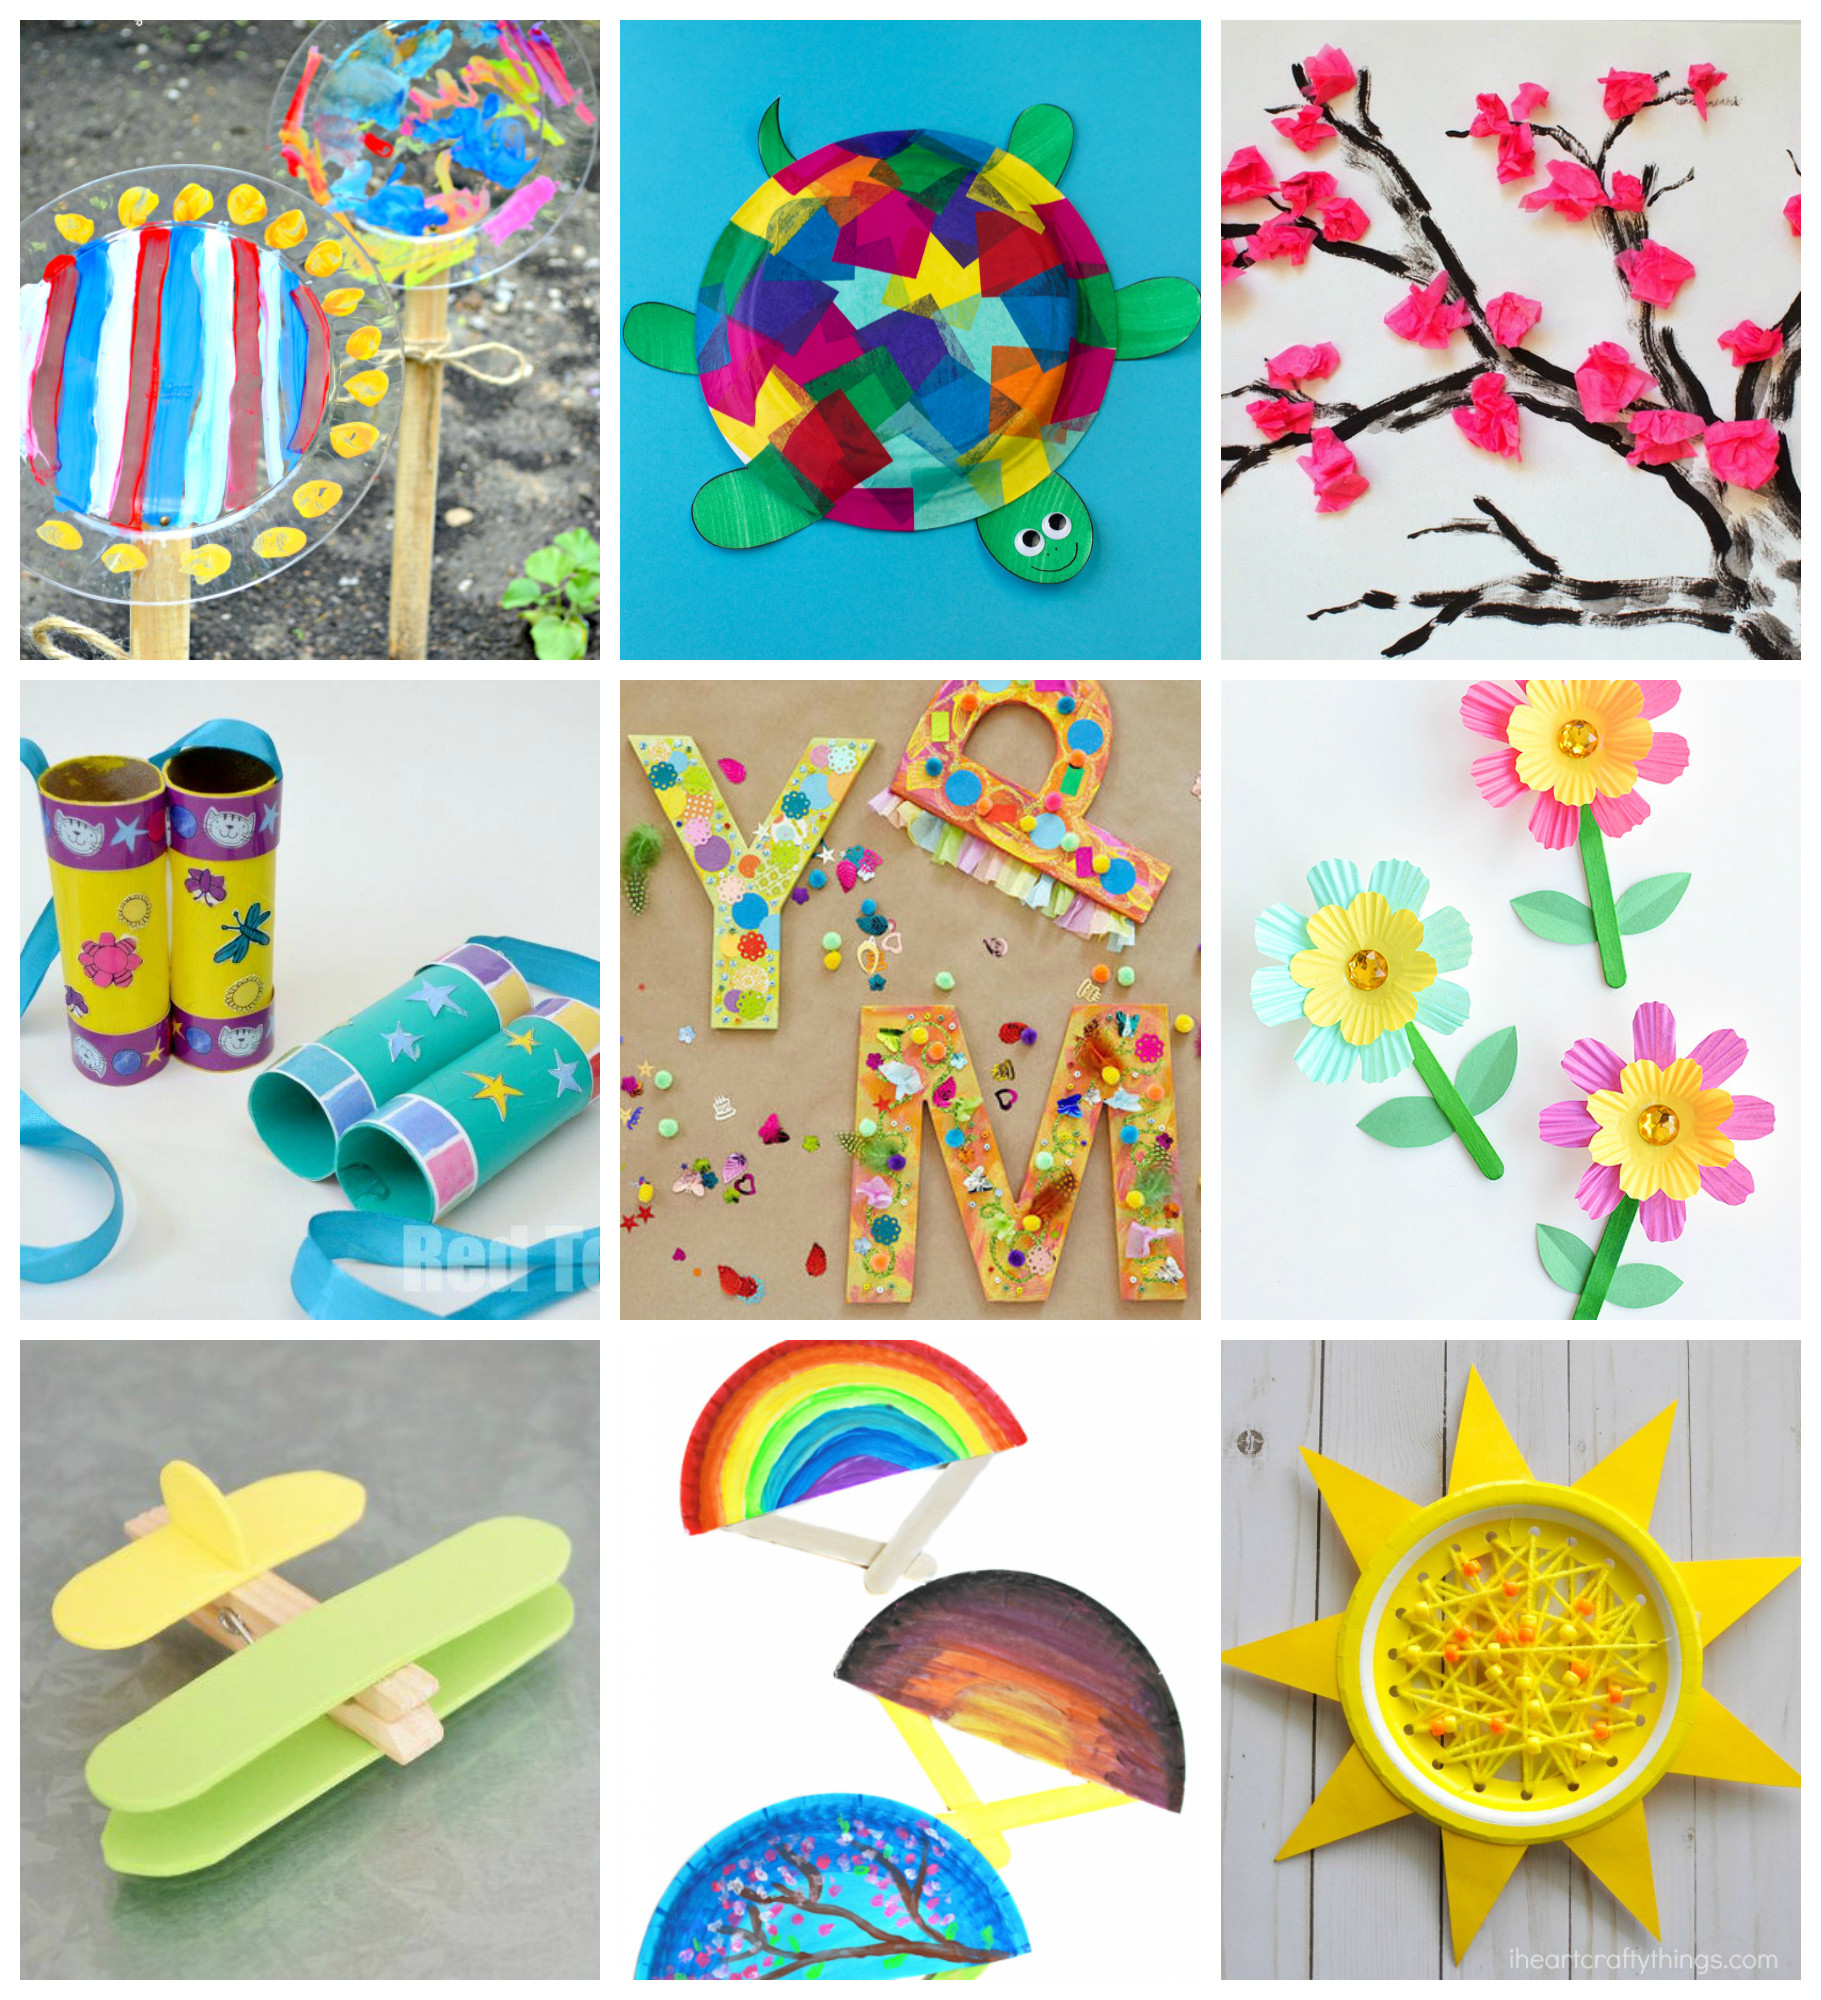 Easy Arts And Crafts For Preschoolers
 50 Quick & Easy Kids Crafts that ANYONE Can Make